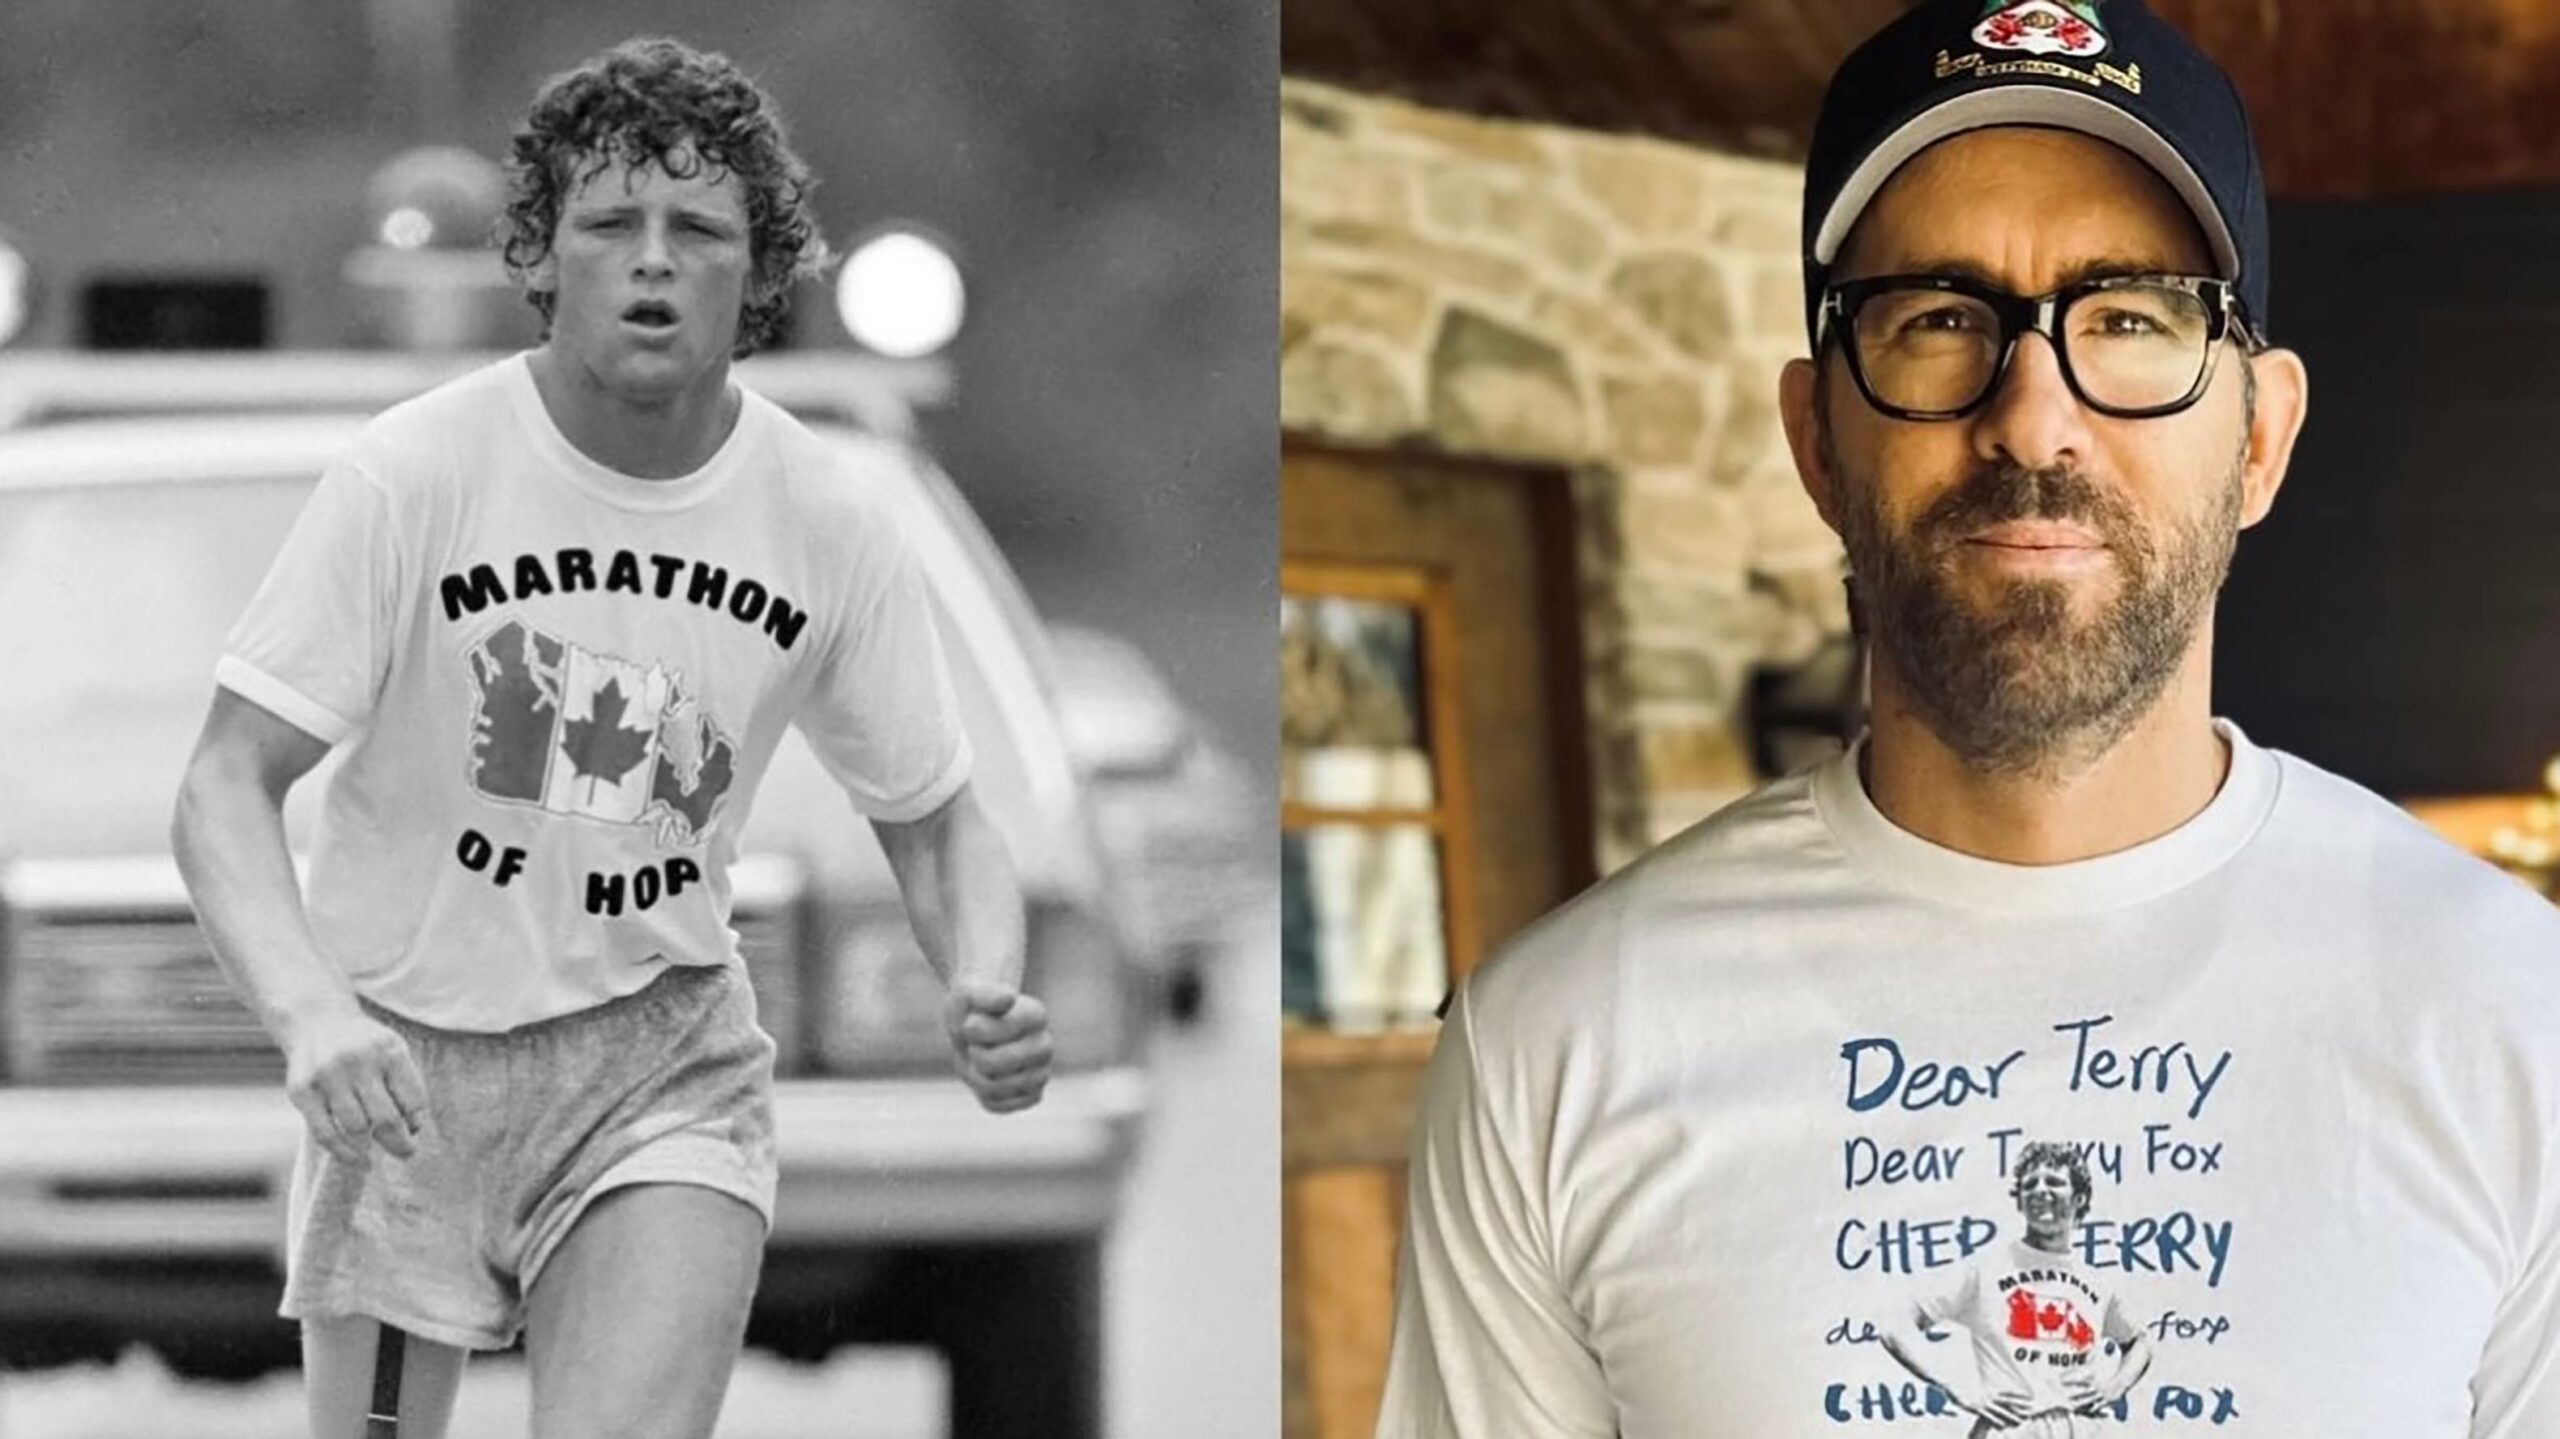 Ryan Reynolds partners with Terry Fox Foundation on special charity shirt thumbnail